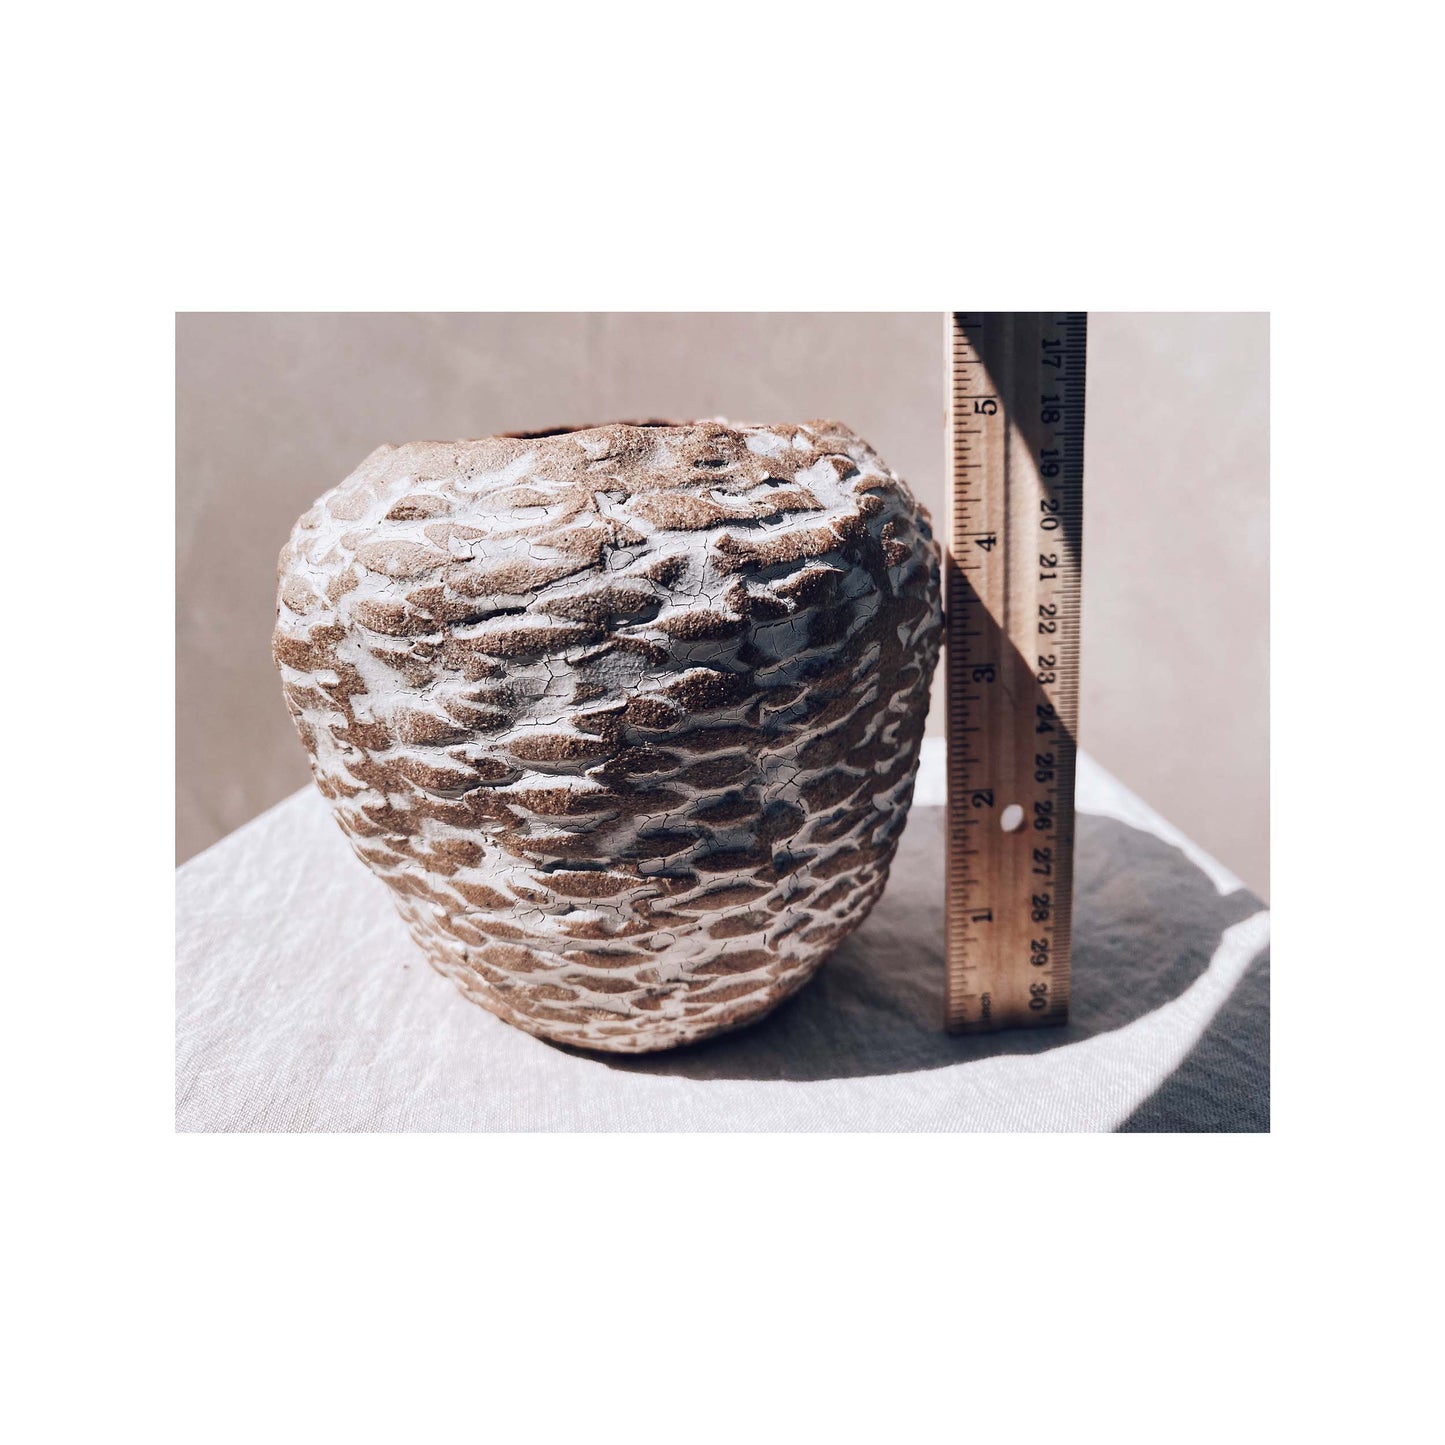 Basket textured Rounded Planter